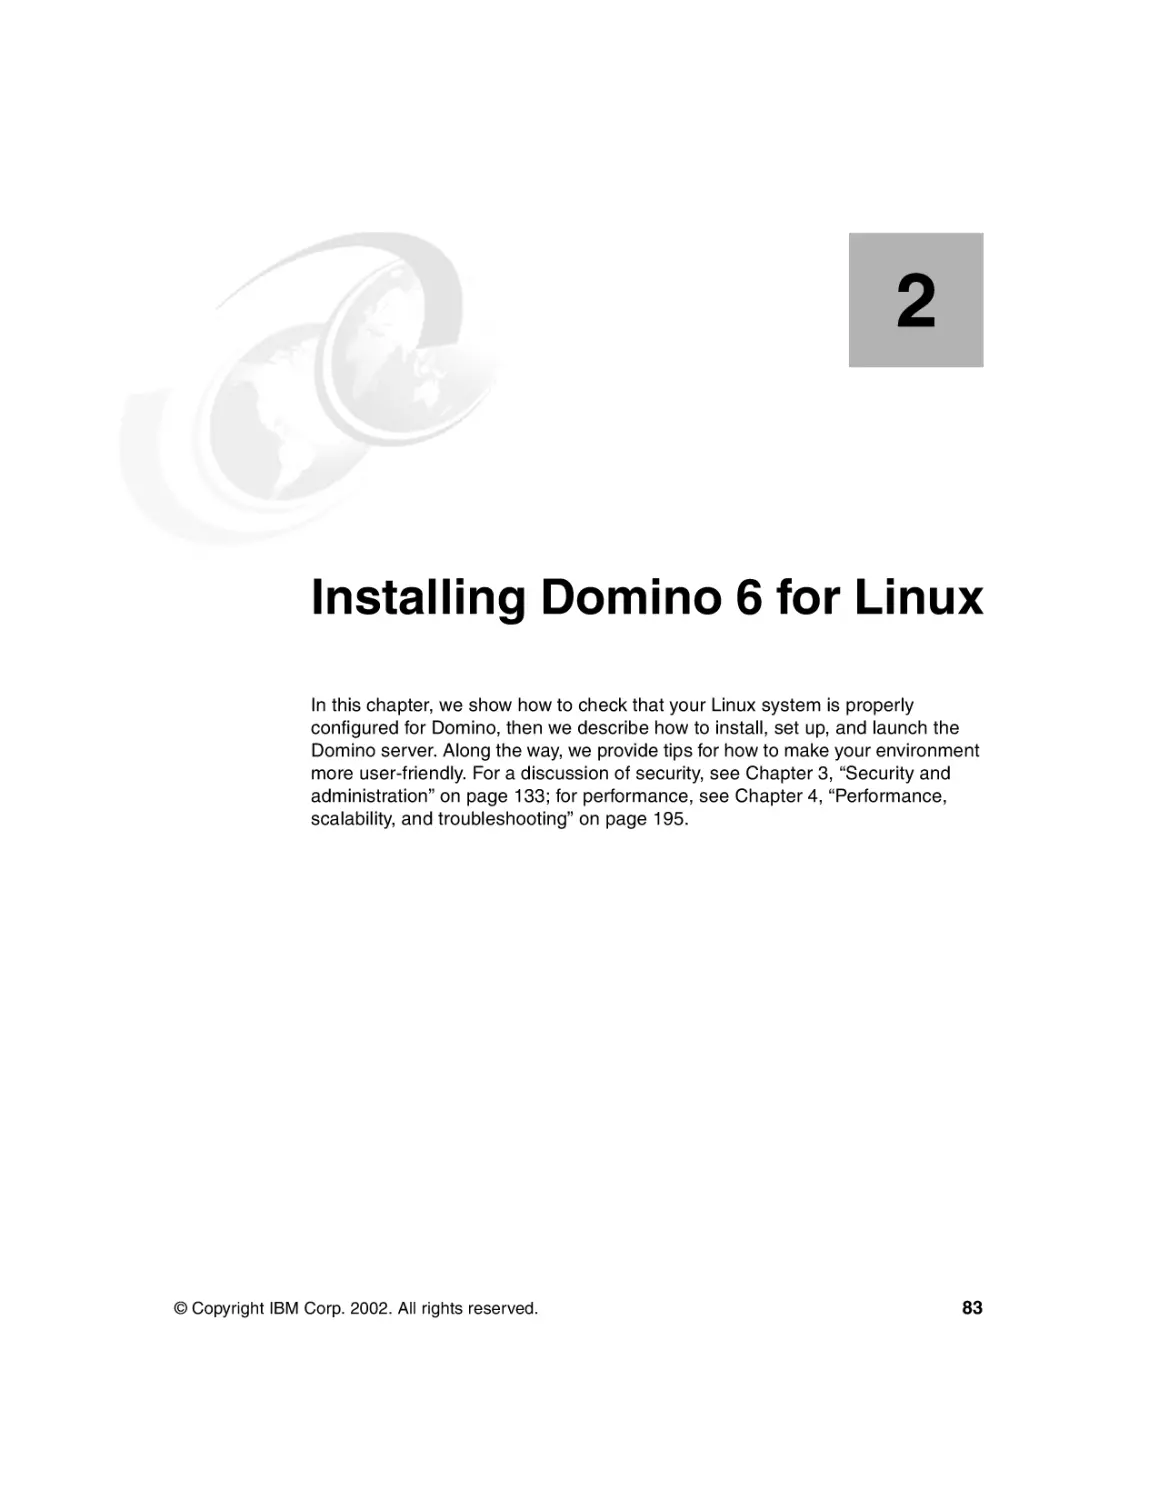 Chapter 2. Installing Domino 6 for Linux